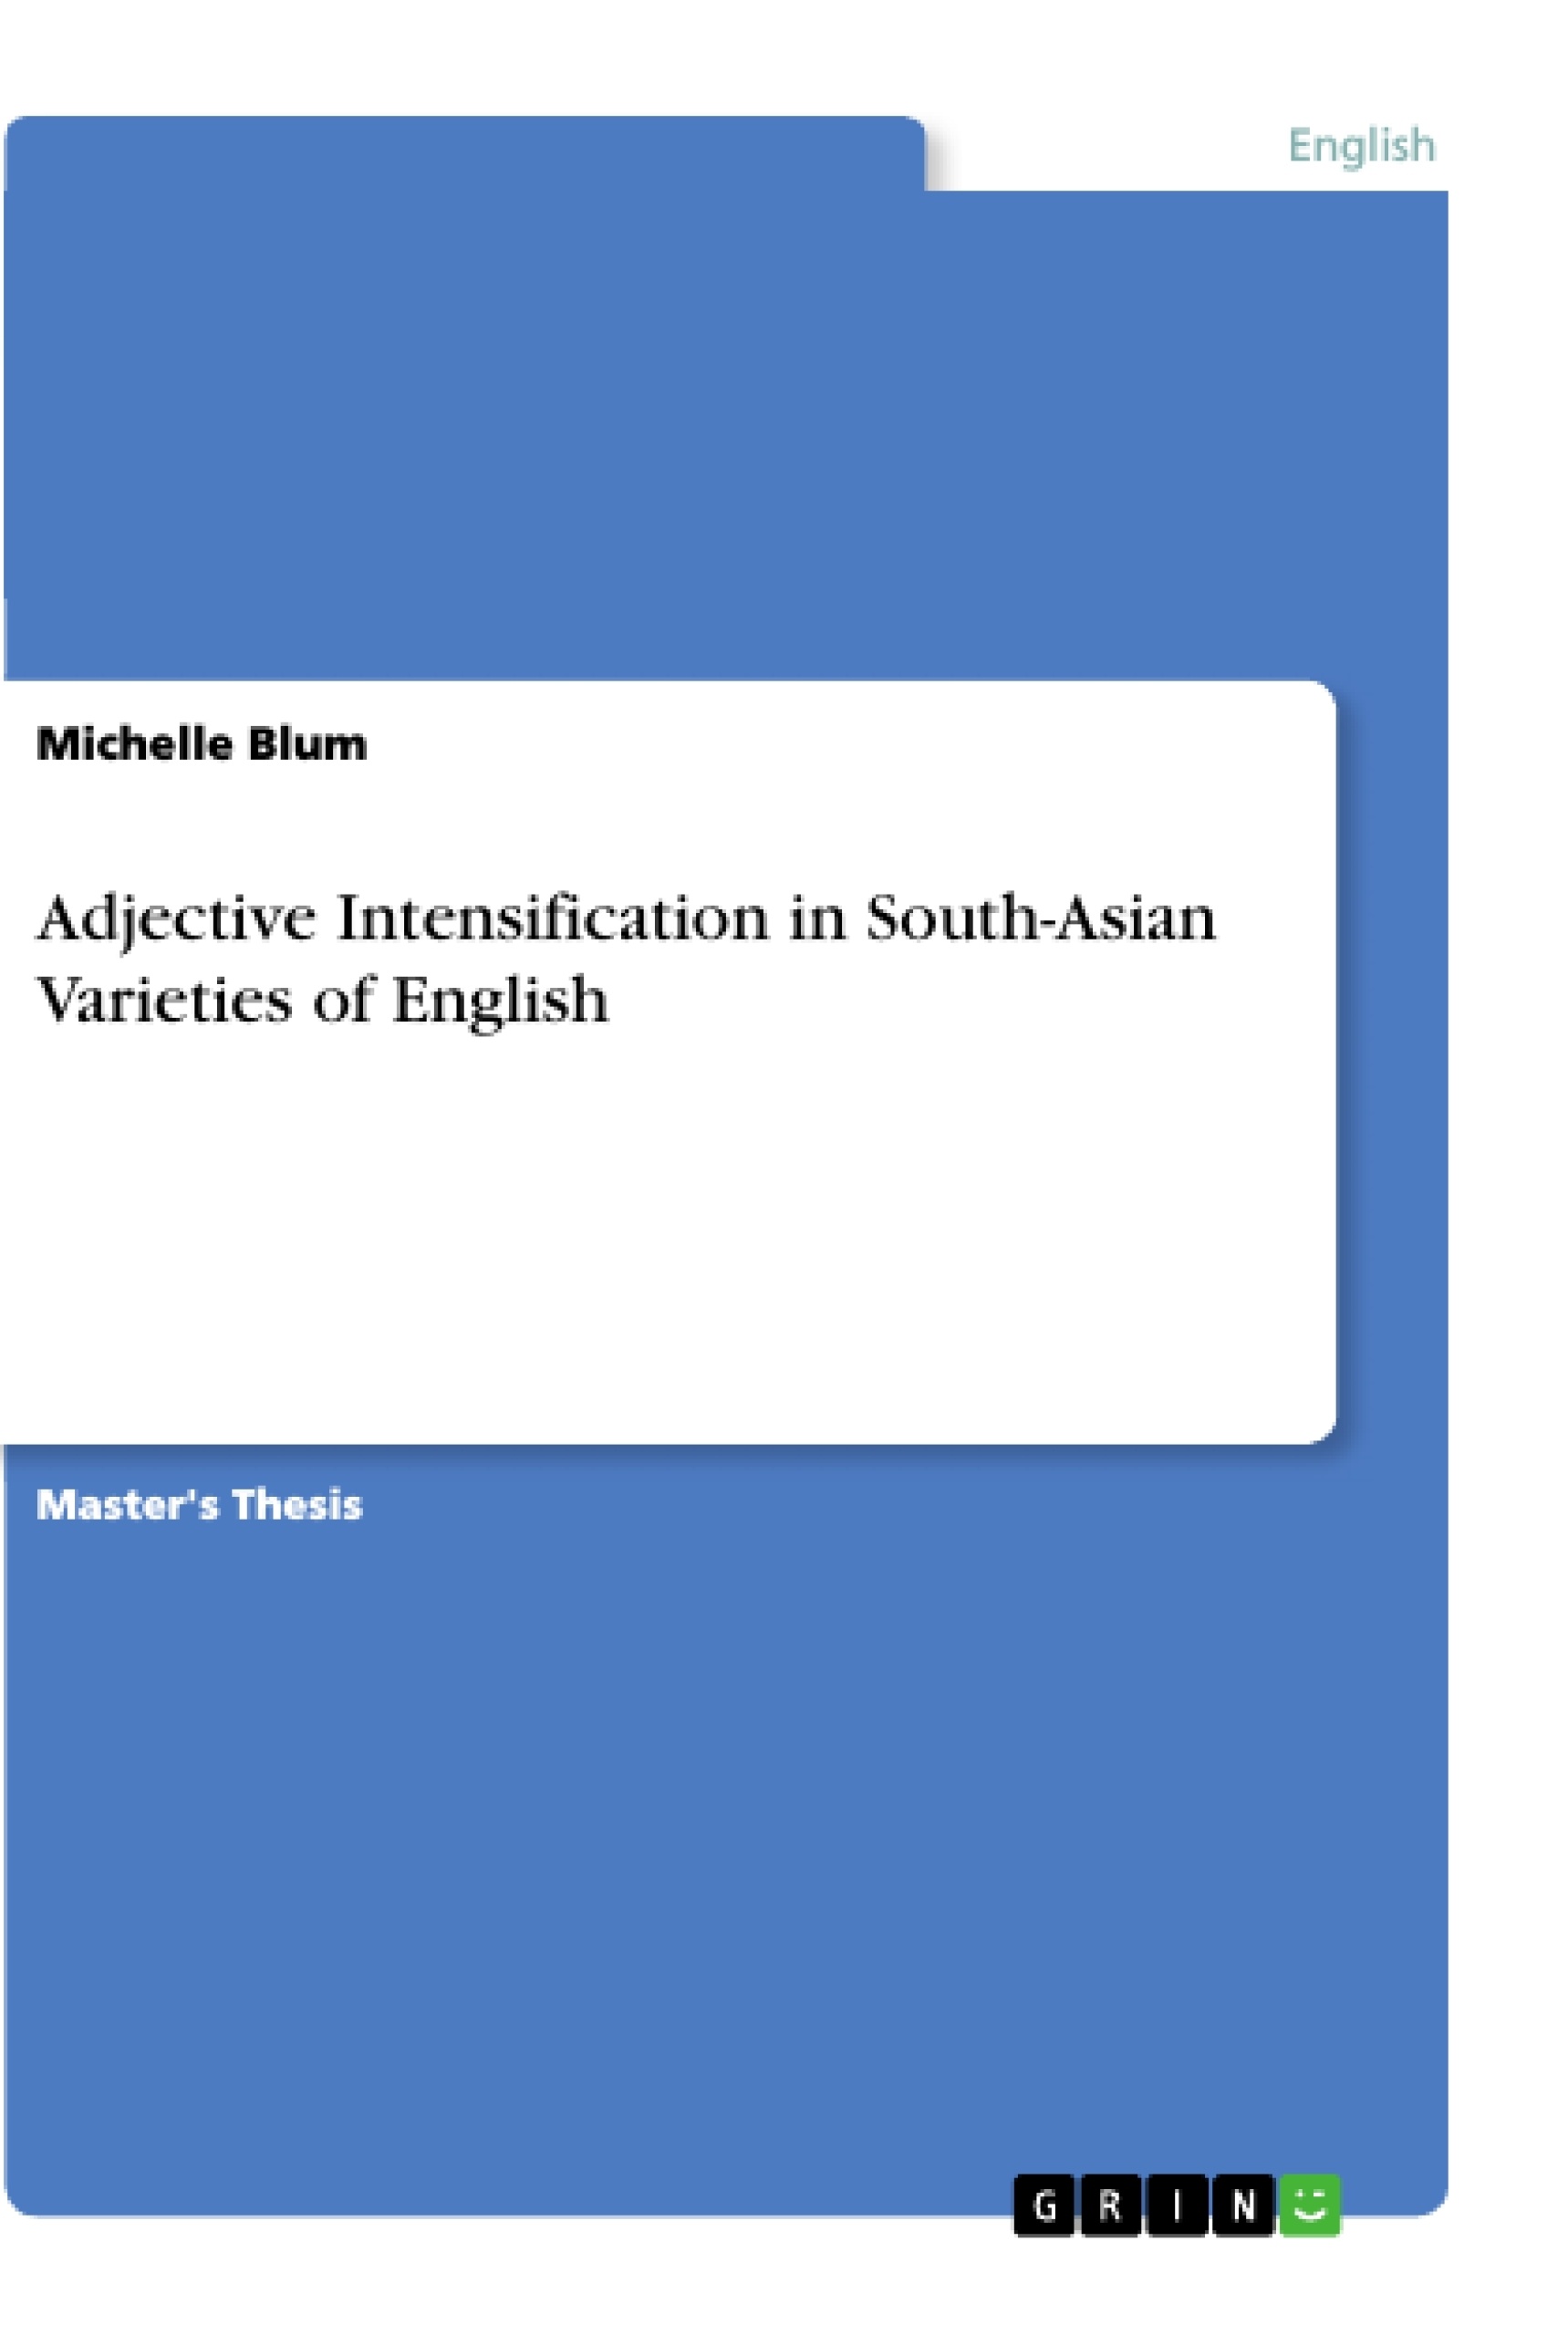 Titre: Adjective Intensification in South-Asian Varieties of English